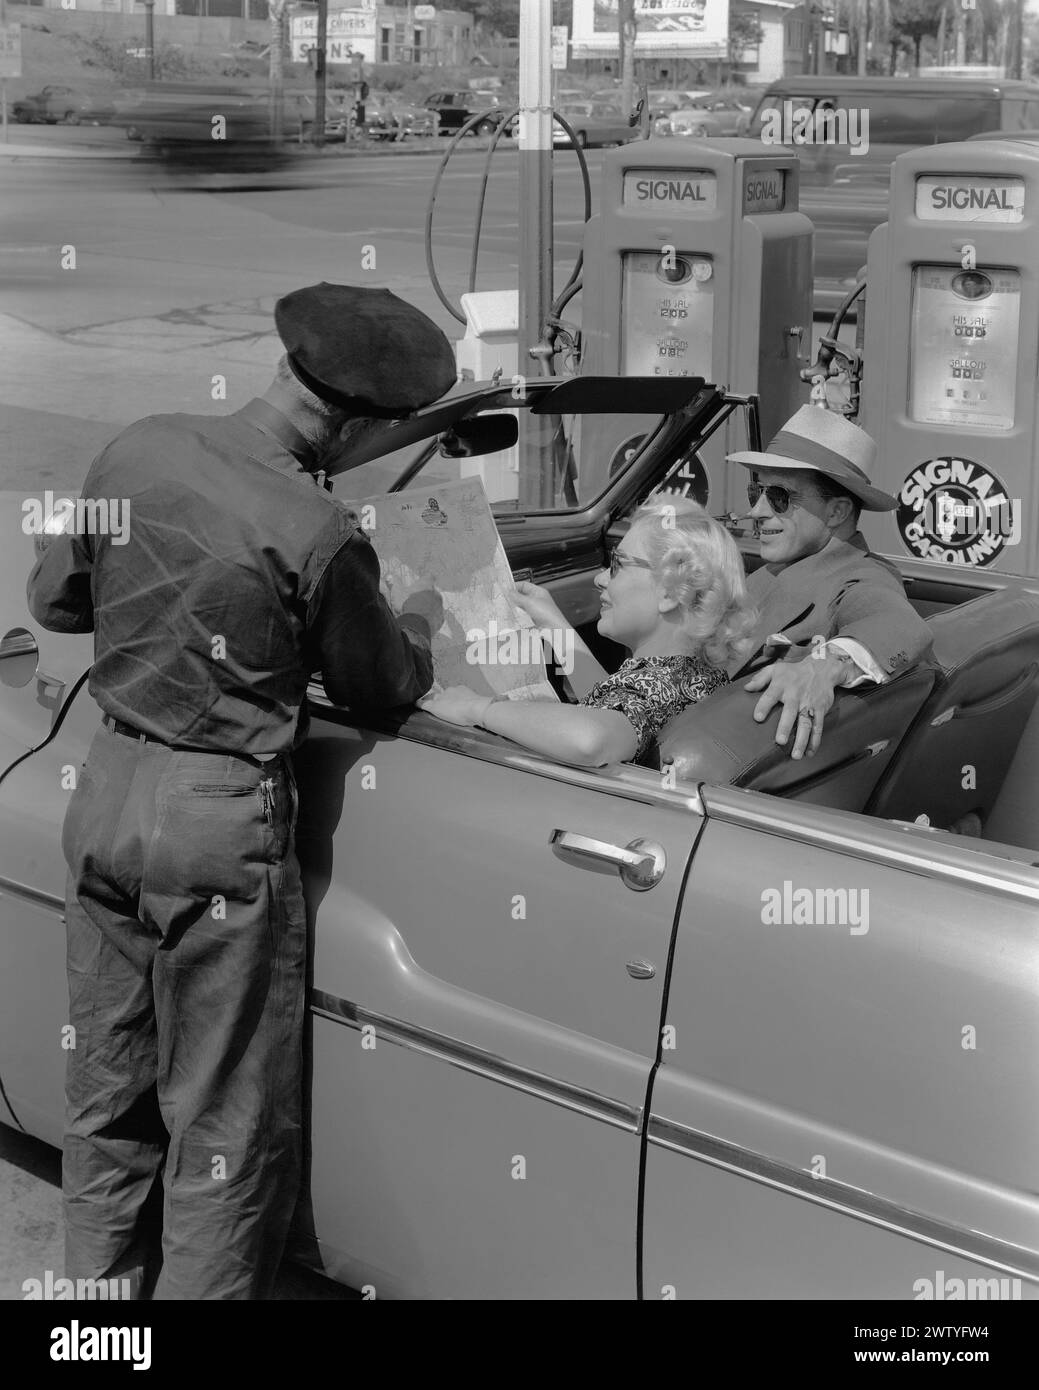 A service station attendant helps a couple at the gas pump with directions using a map Stock Photo